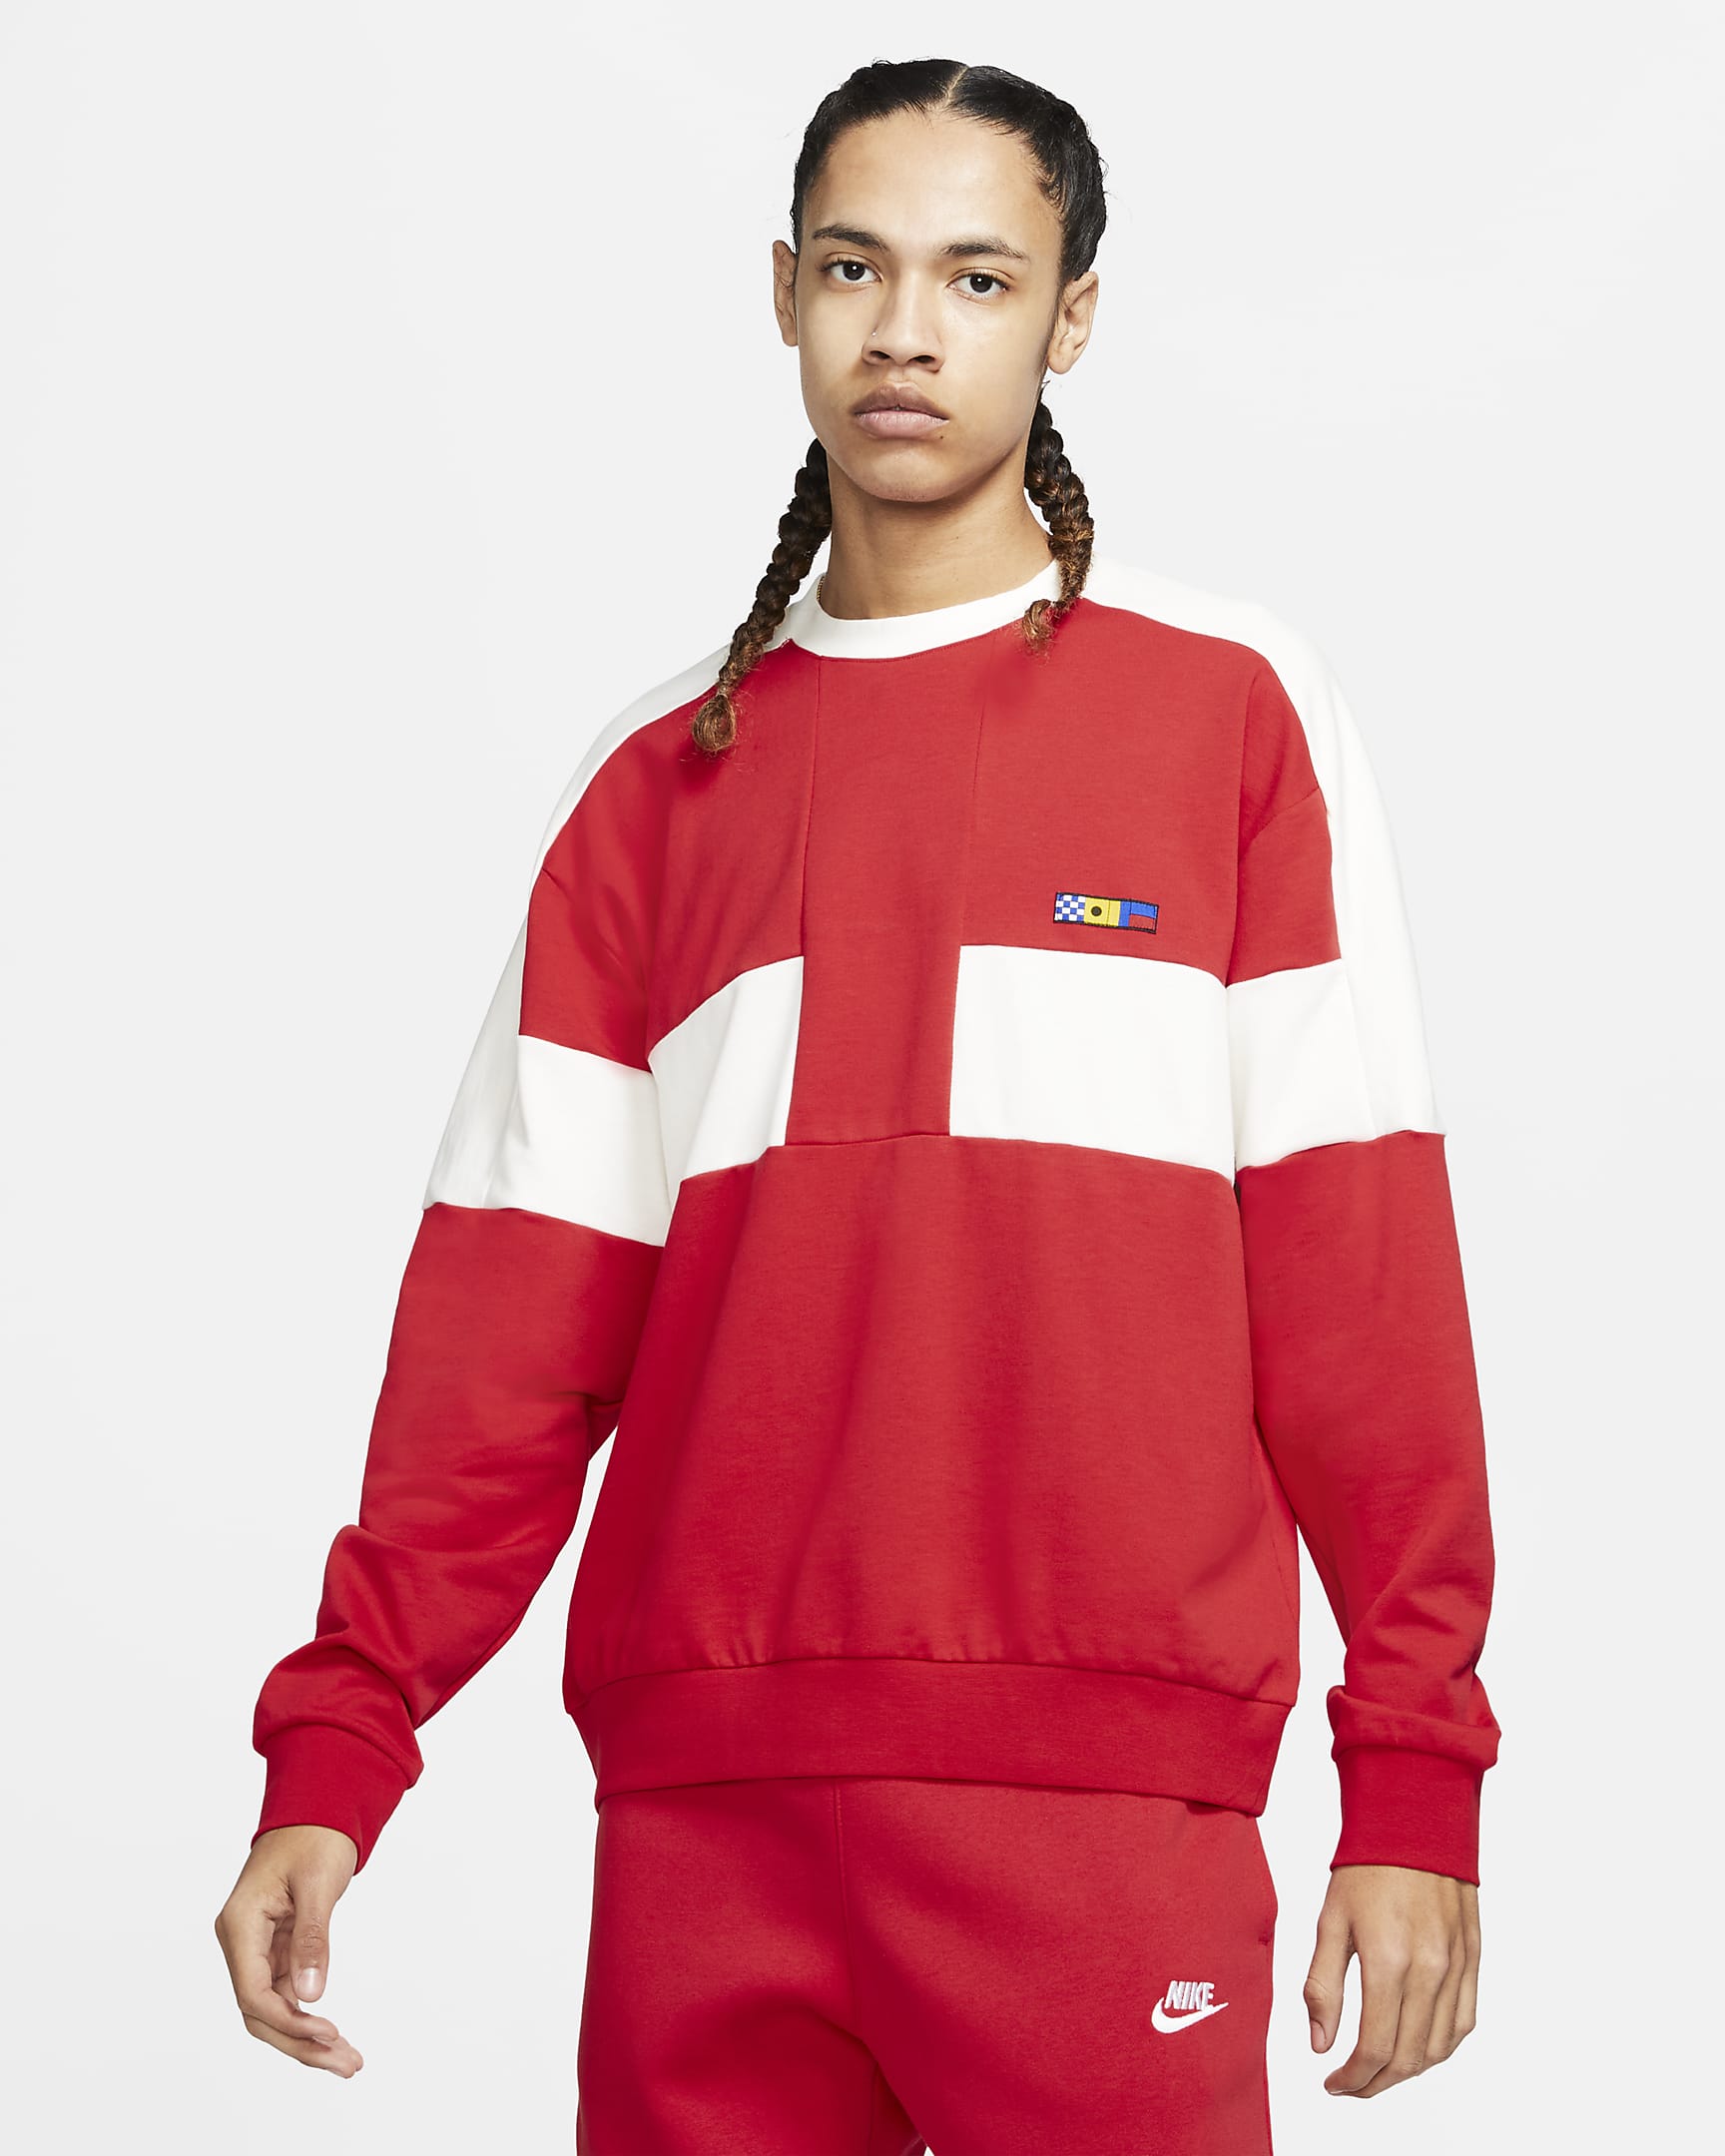 nike-sportswear-reissue-mens-french-terry-crew-8S9KTc.png